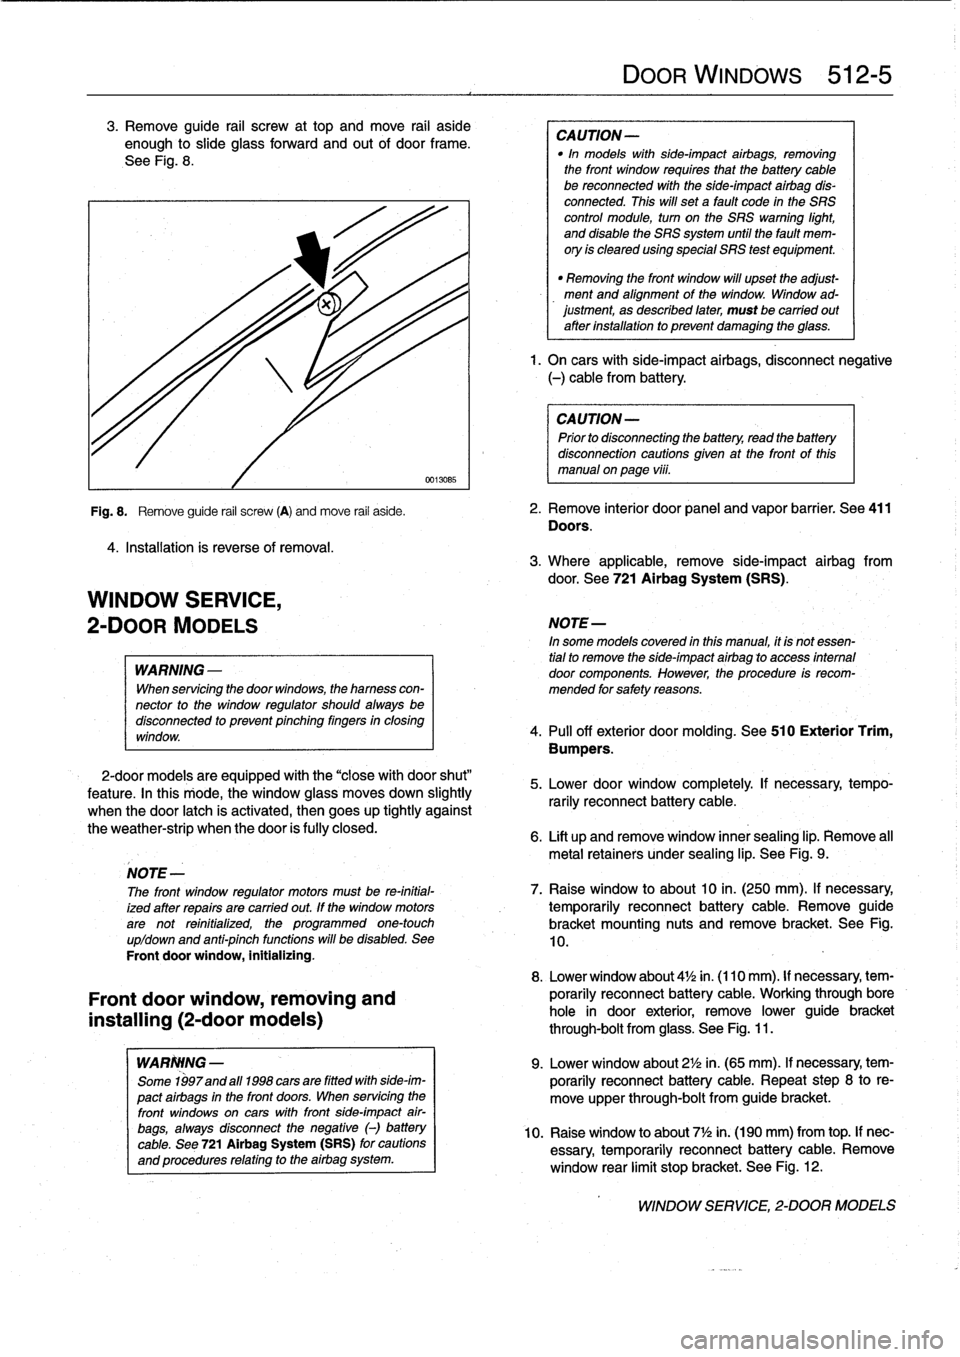 BMW 328i 1998 E36 Workshop Manual 
3
.
Remove
guide
rail
screw
at
top
and
move
rail
aside
enough
to
slide
glass
forward
and
out
of
door
frame
.

See
Fig
.
8
.

4
.
Installation
is
reverse
of
removal
.

WINDOW
SERVICE,

2-DOOR
MODELS

